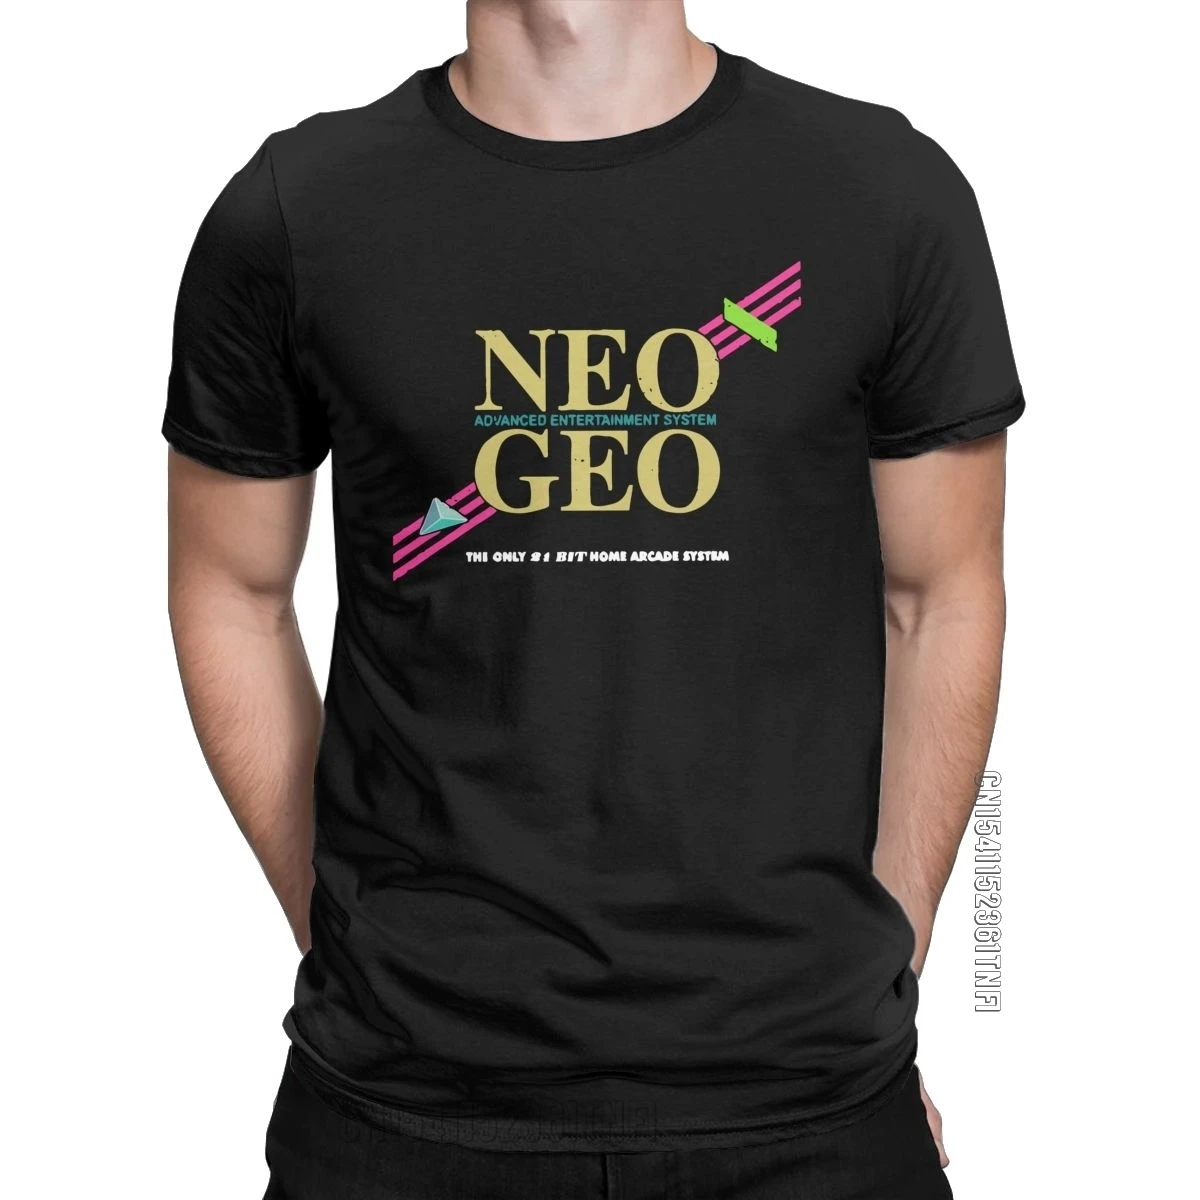 

AES T Shirt For Men 100% Cotton Leisure T-Shirts O Neck Neo Geo Snk Tee Shirt Classic Short Sleeve Clothes 2XL 3XL